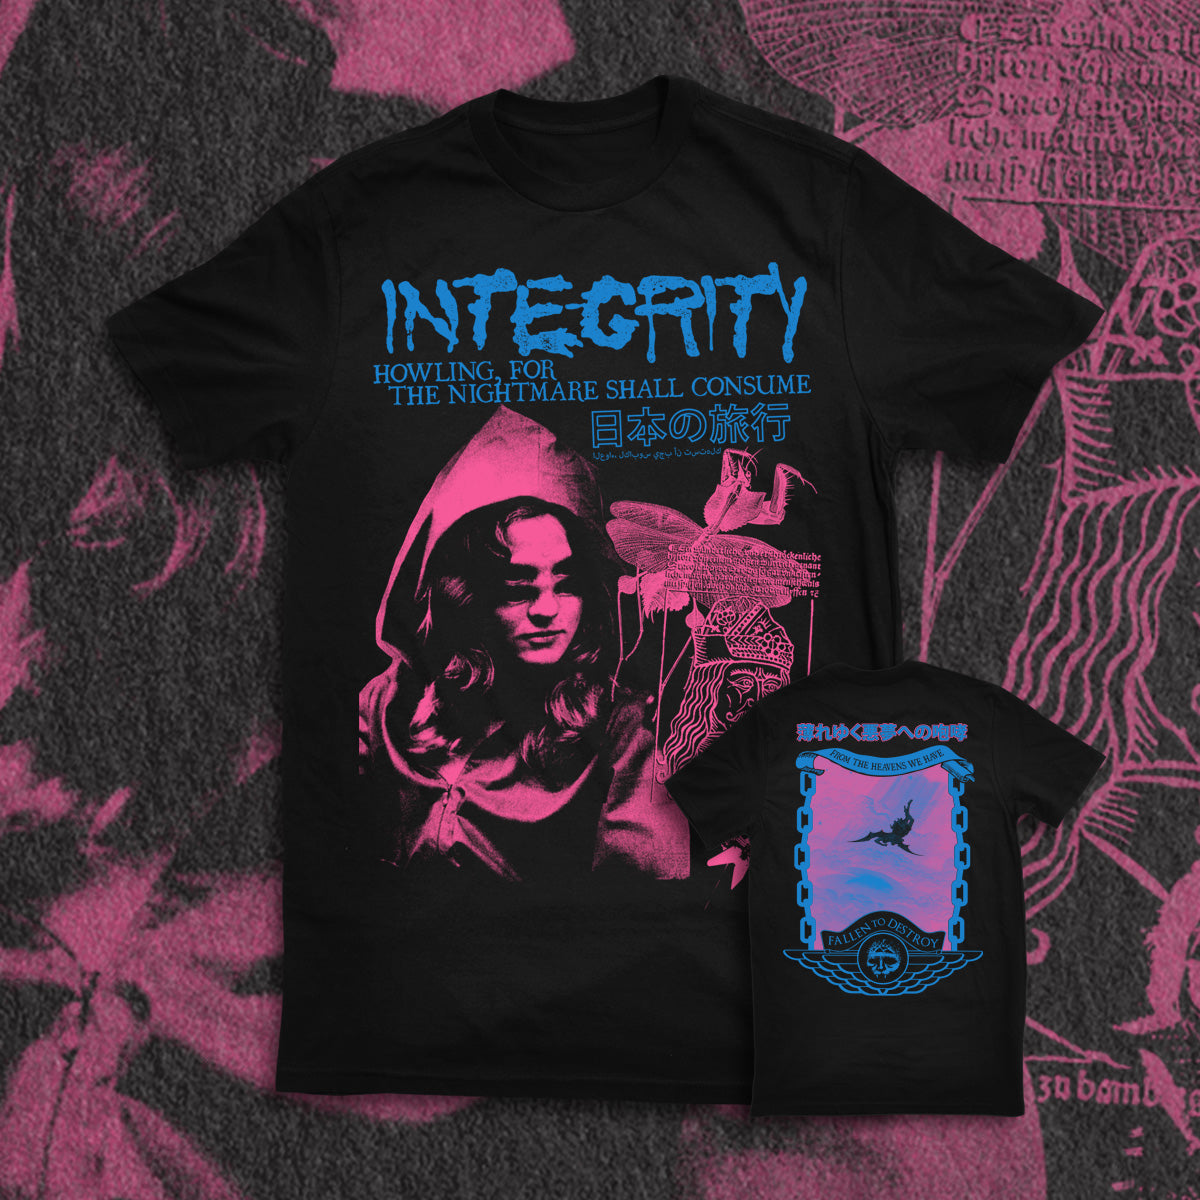 INTEGRITY "HOWLING" BRIGHT SHIRT (PRE-ORDER)